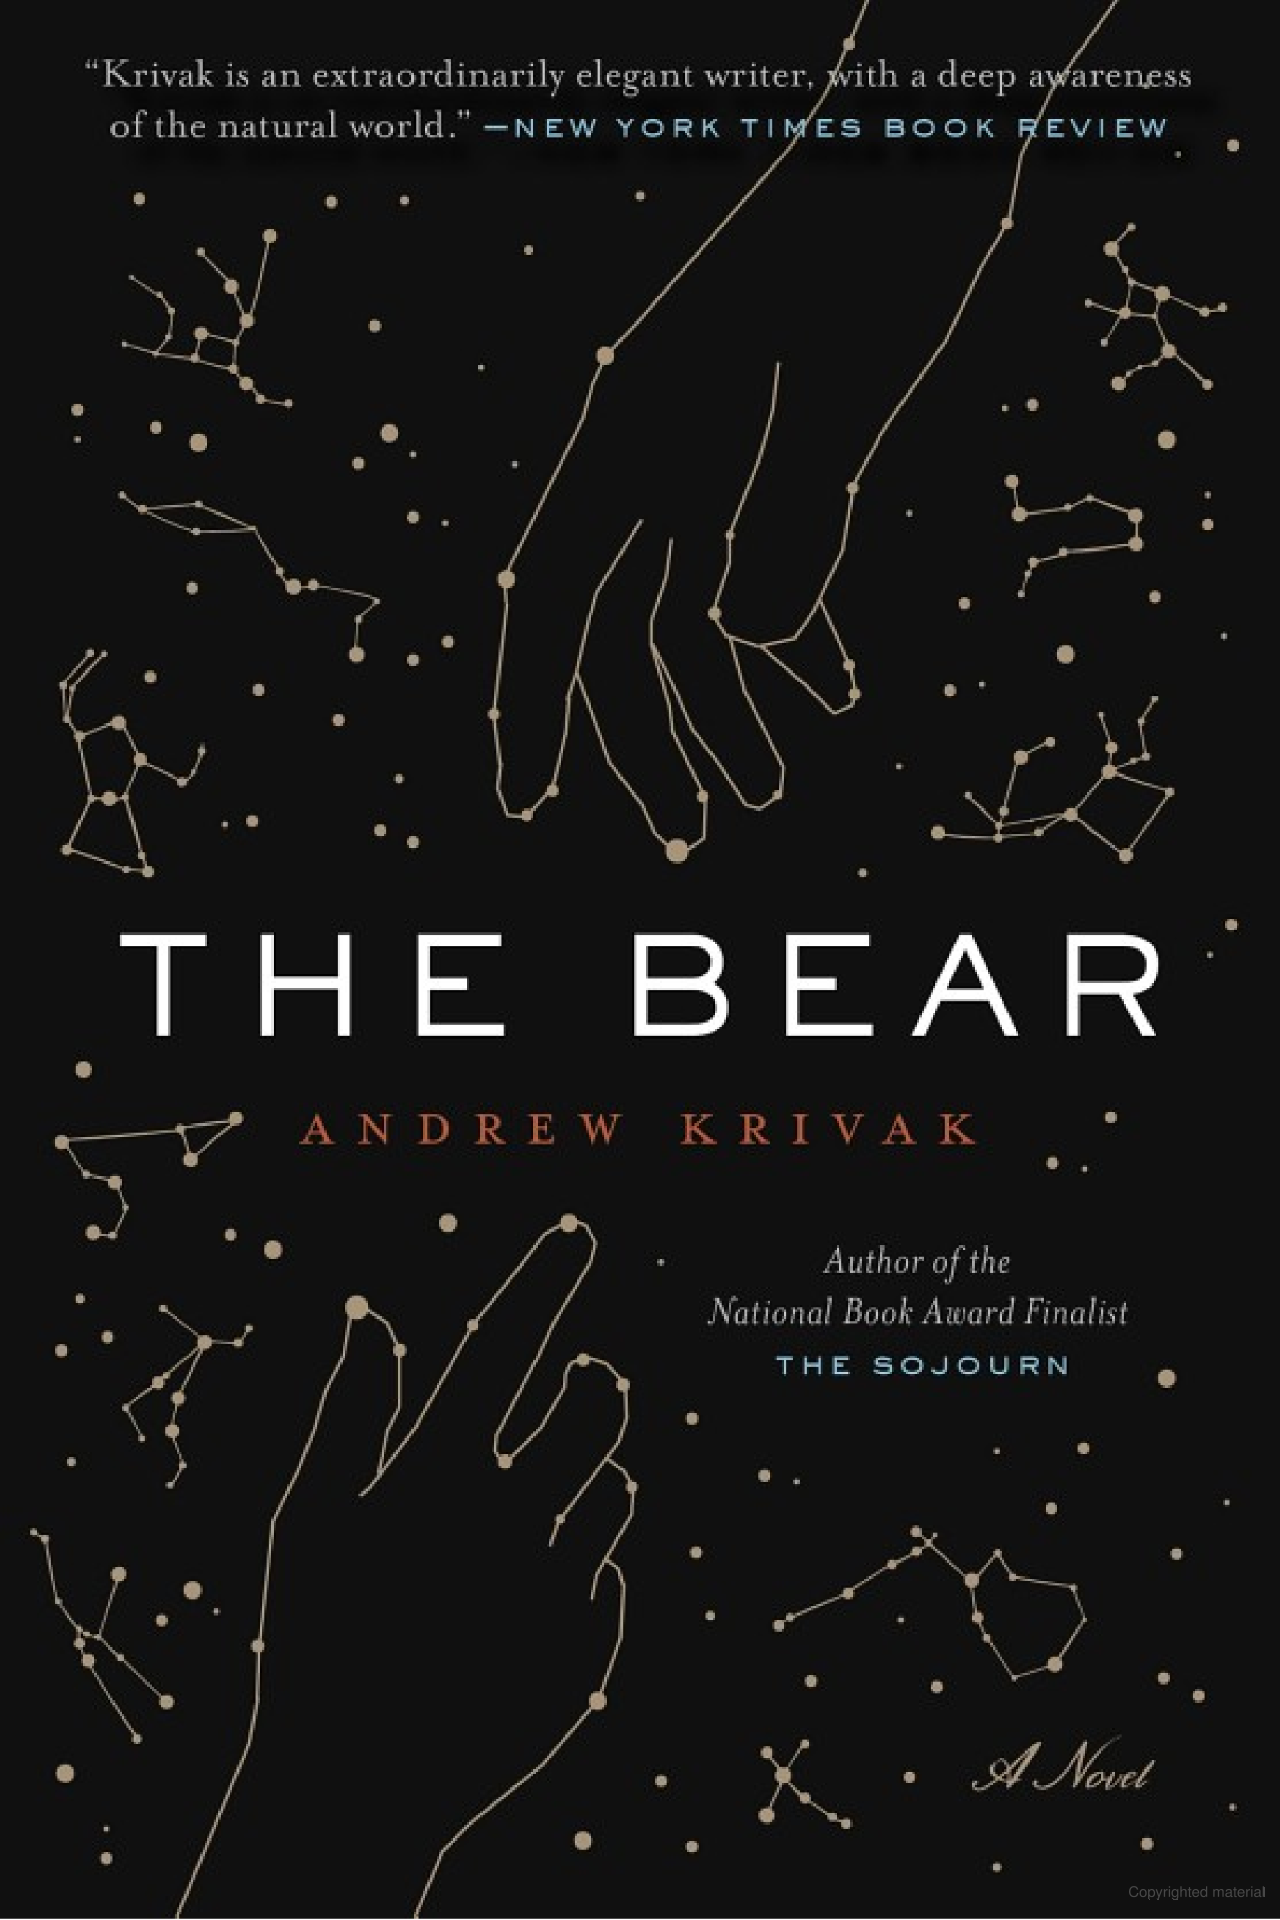 The Bear book cover